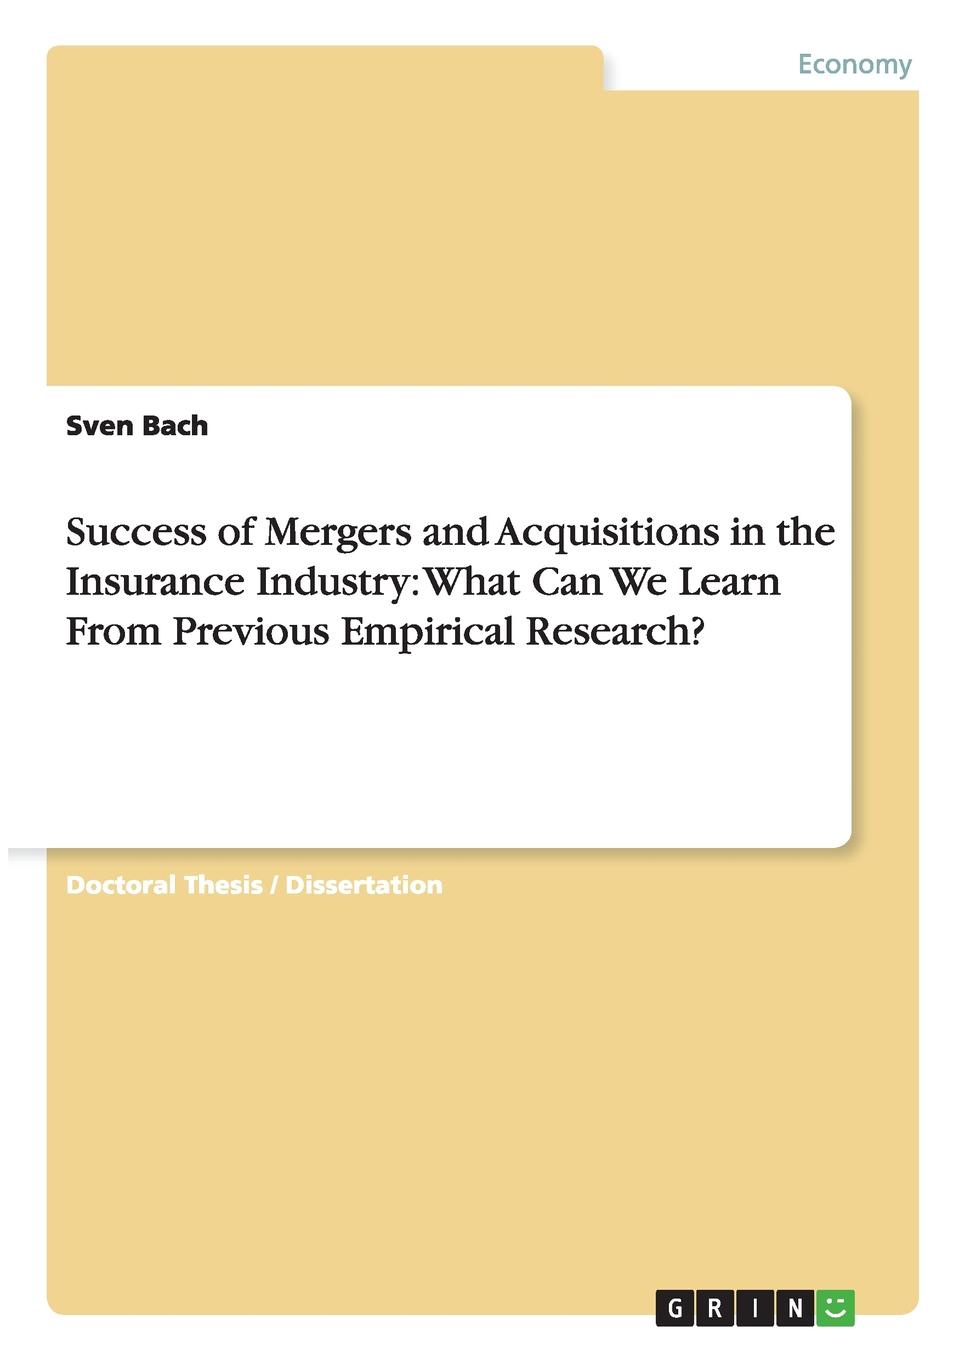 Success of Mergers and Acquisitions in the Insurance Industry. What Can We Learn From Previous Empirical Research.